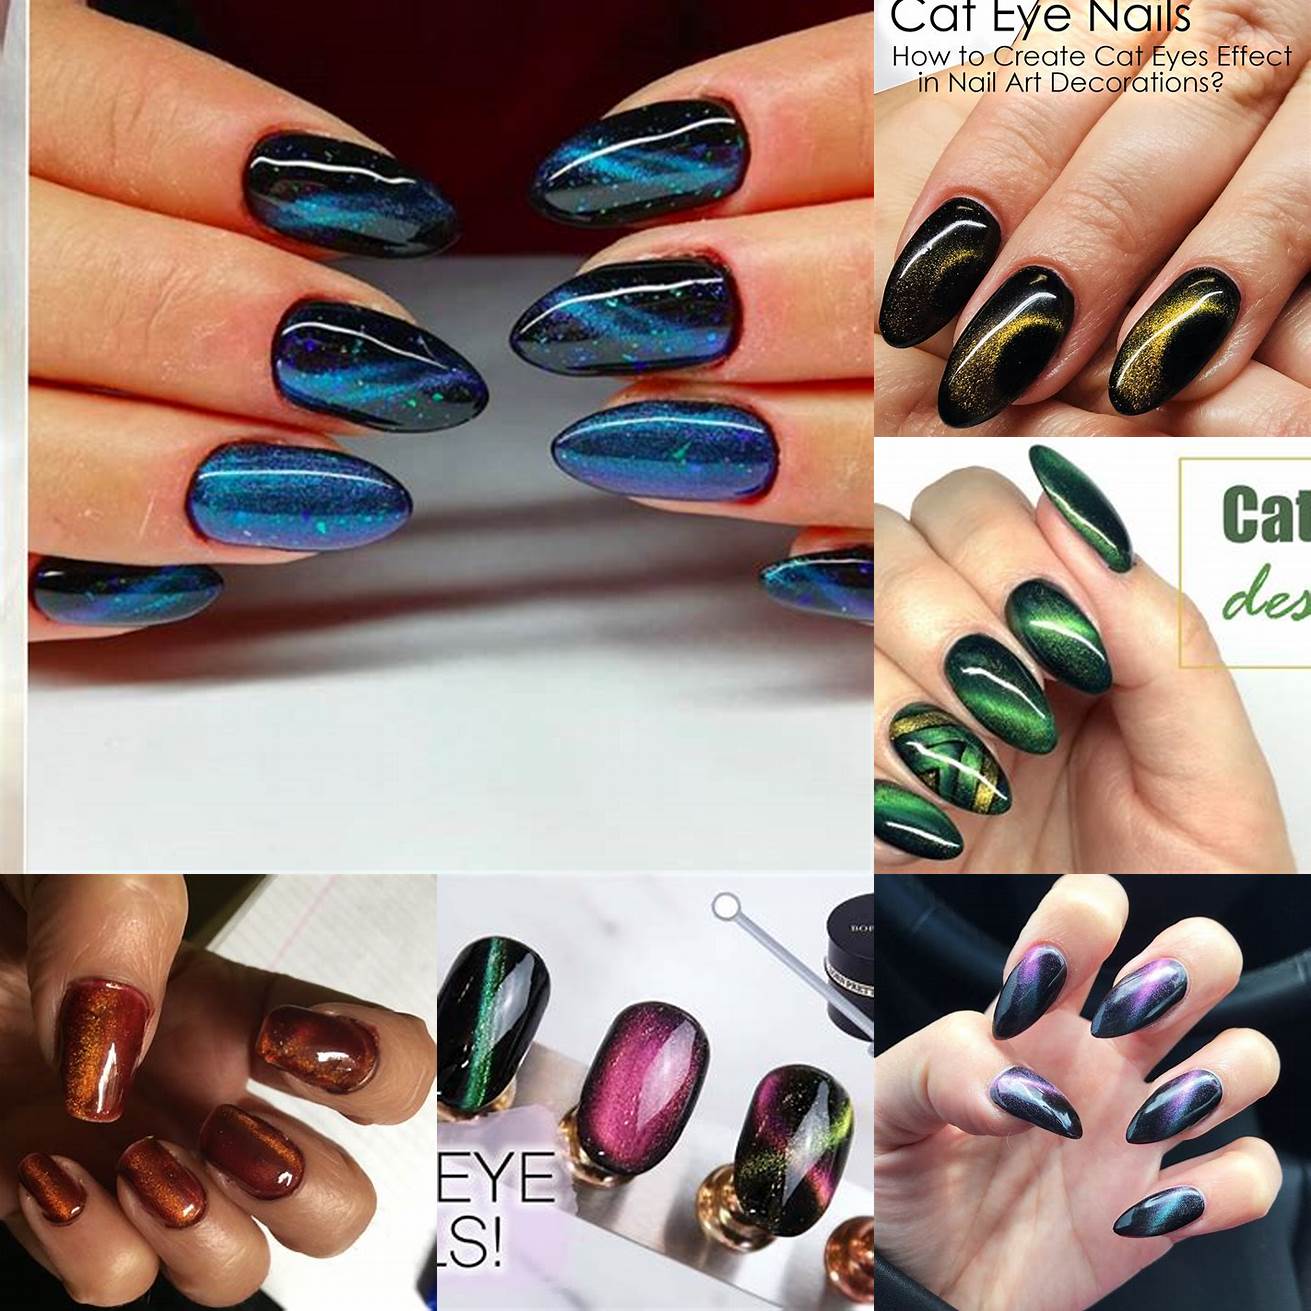 Q Can I use different shades for Cat Eye Nail Art